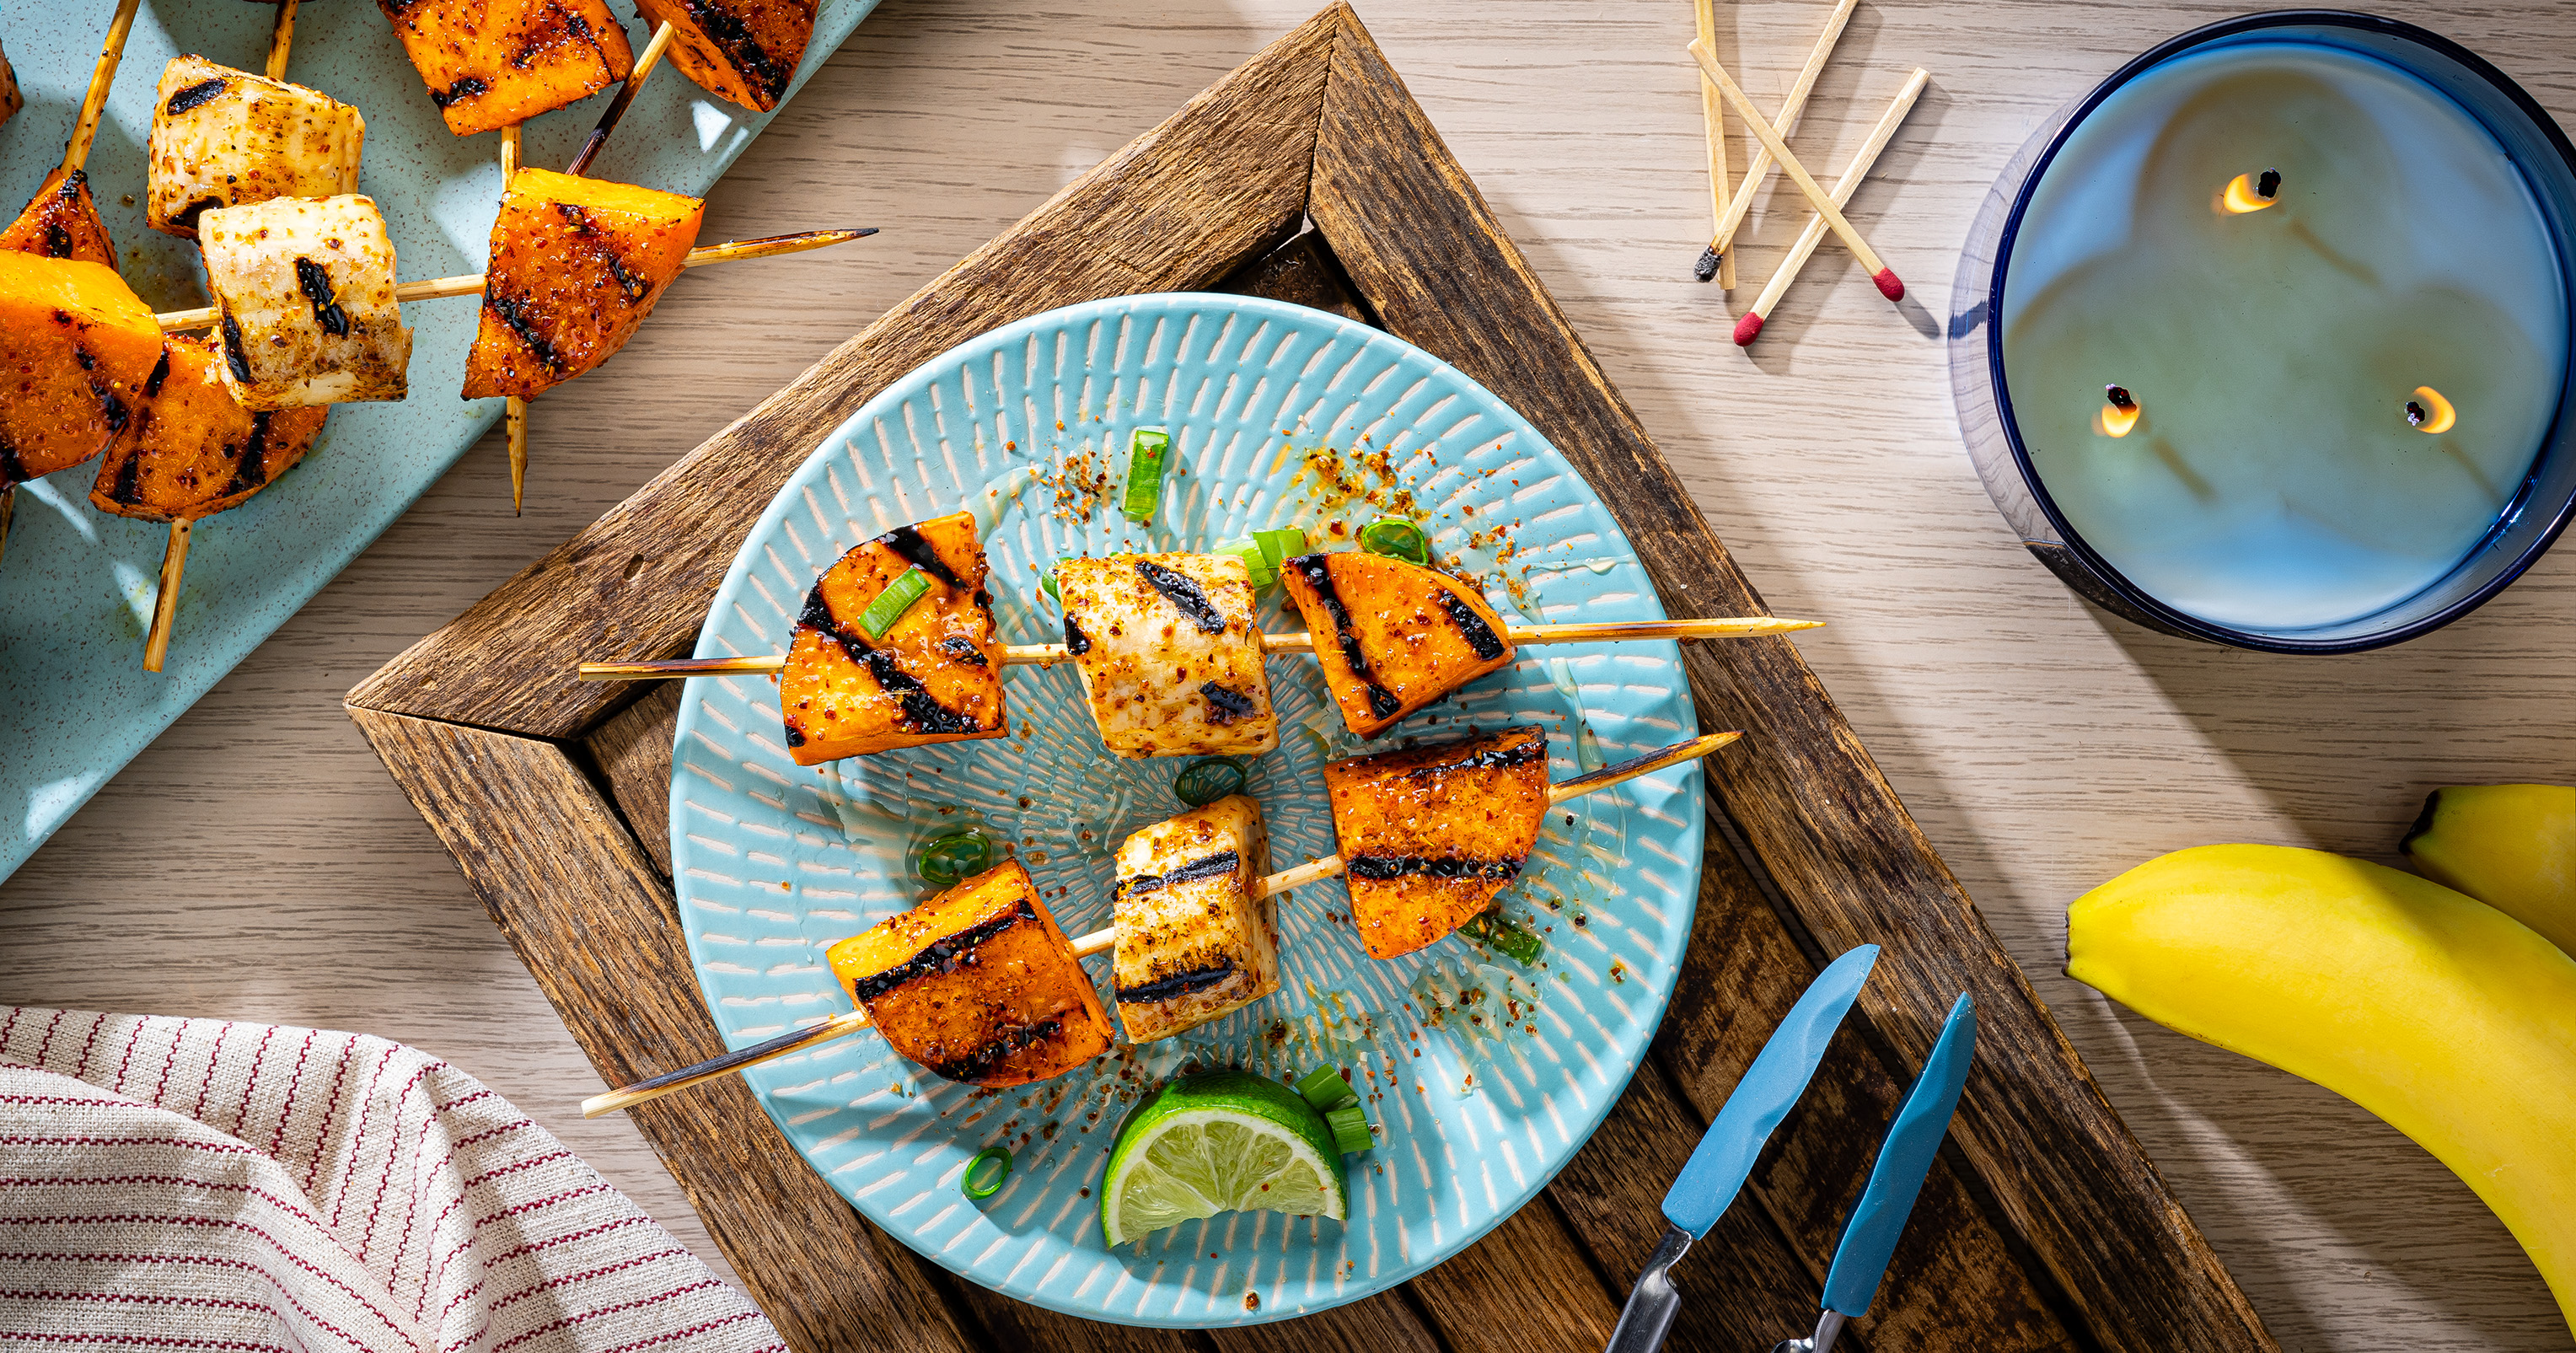 Grilled Chile Lime Banana-Sweet Potato Skewers